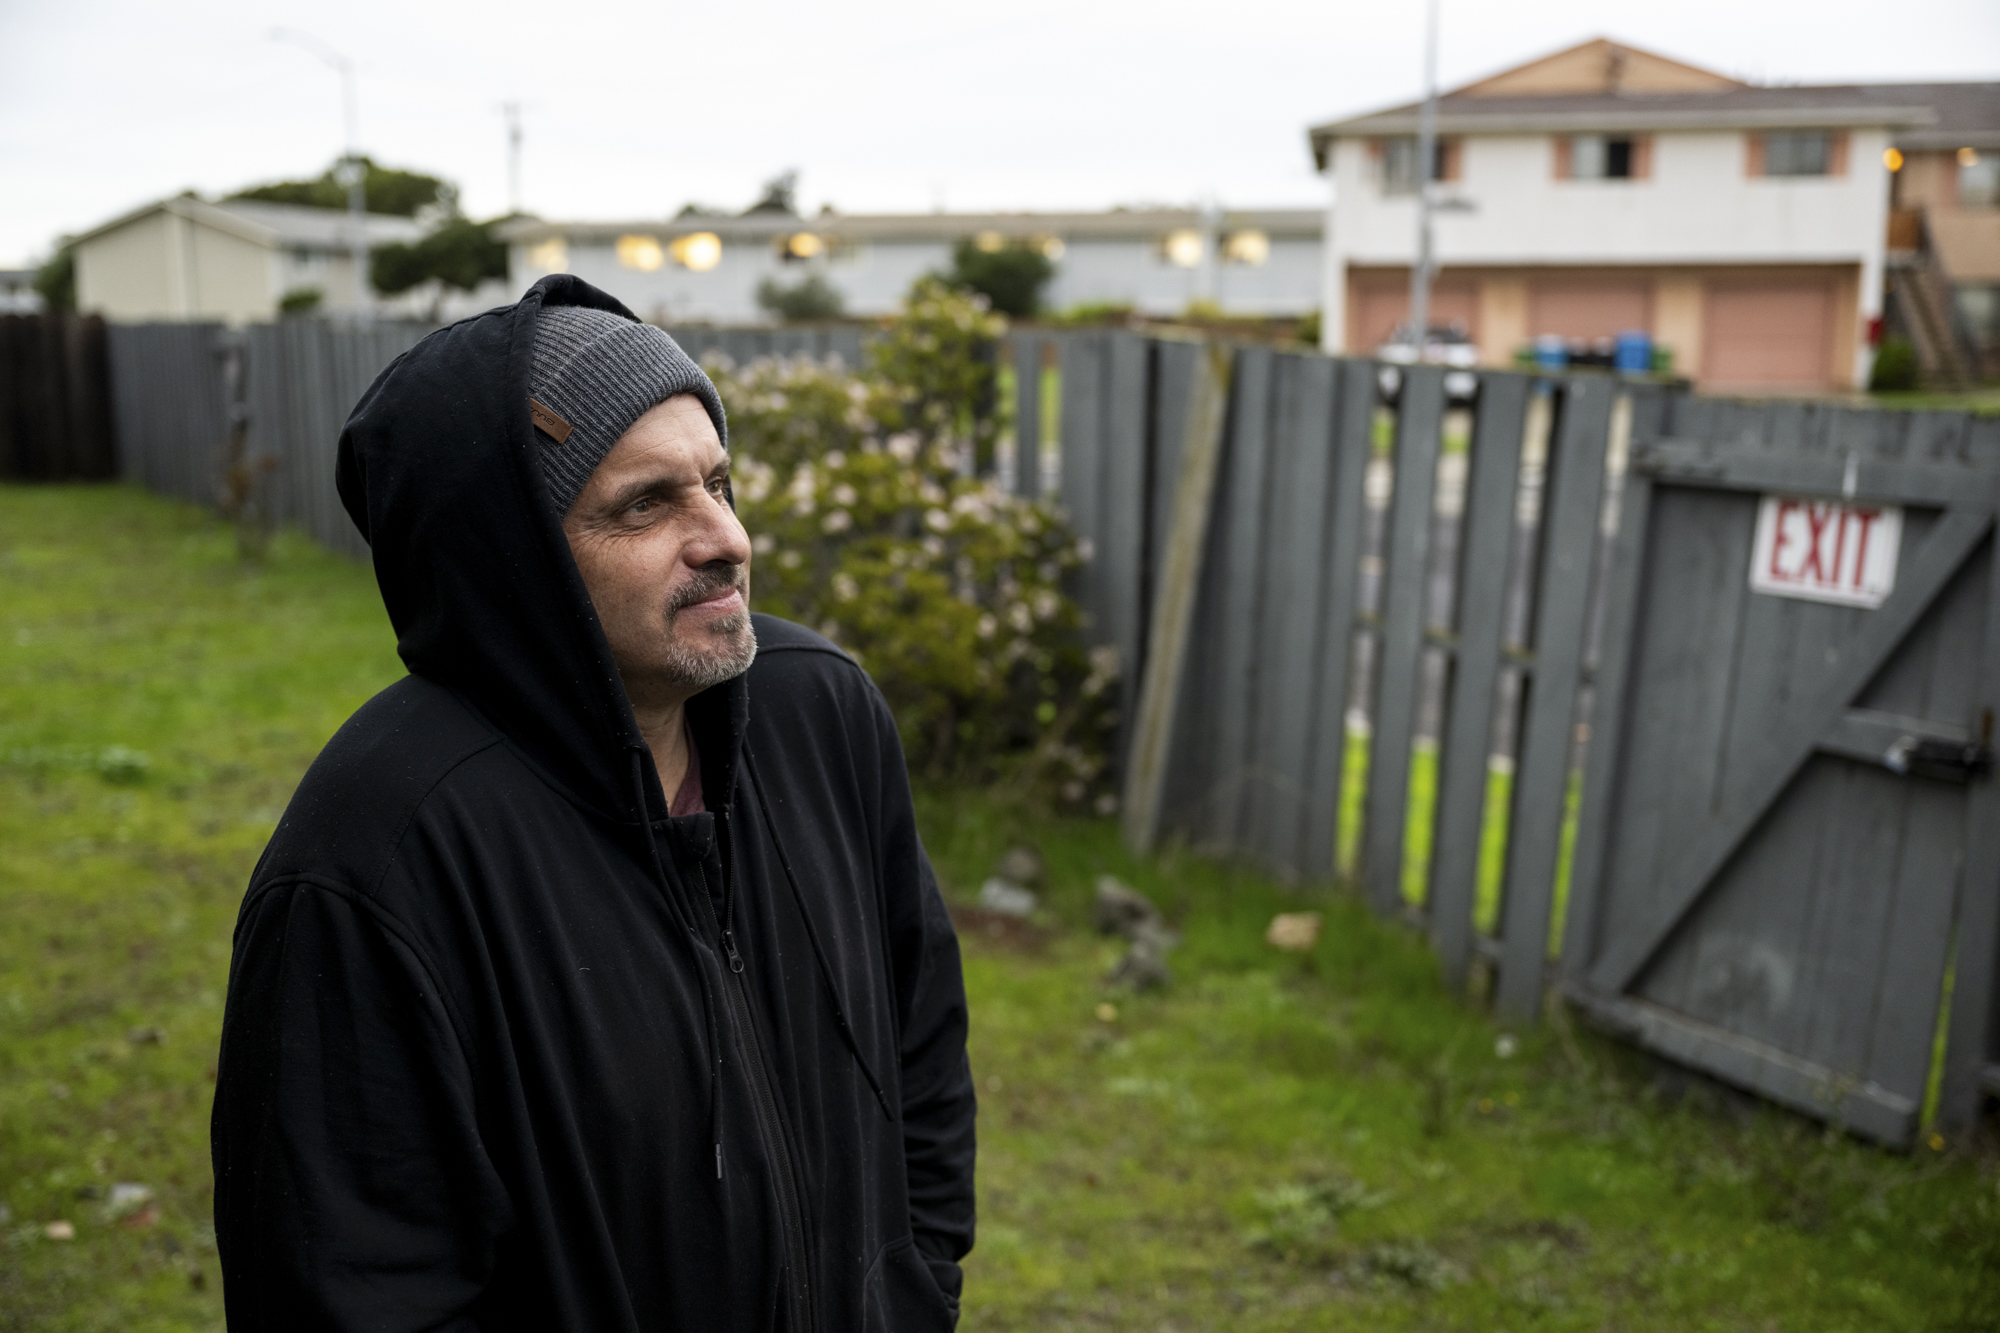 A person wearing a hood stands beside a fence in a residential area.